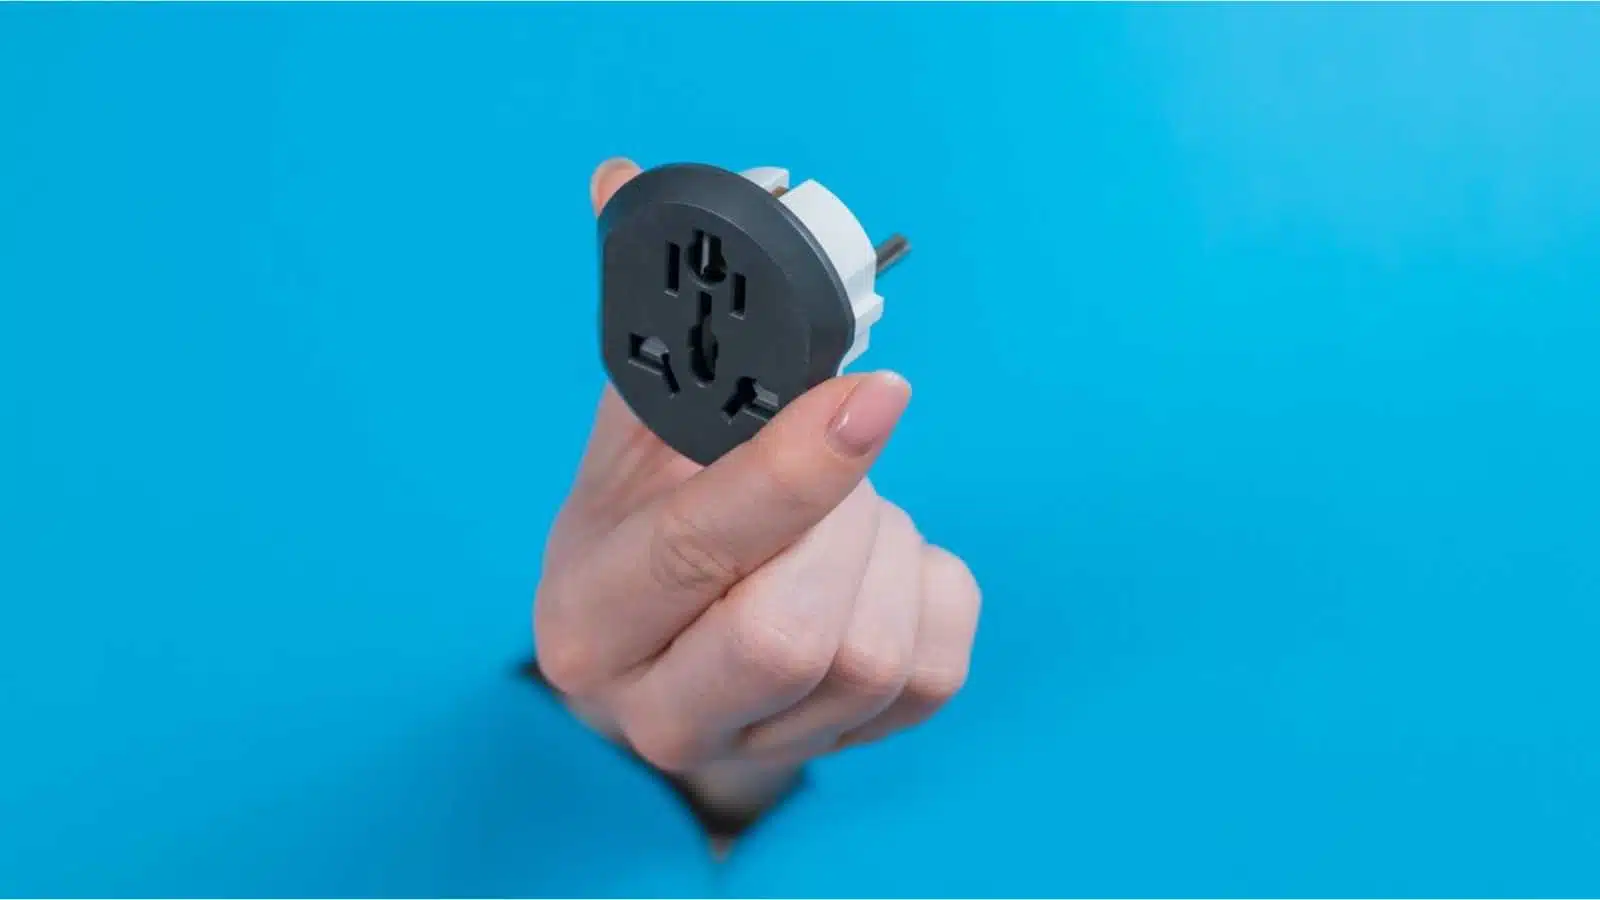 A woman is holding an outlet adapter. A woman's hand sticks out through a hole in a blue background.